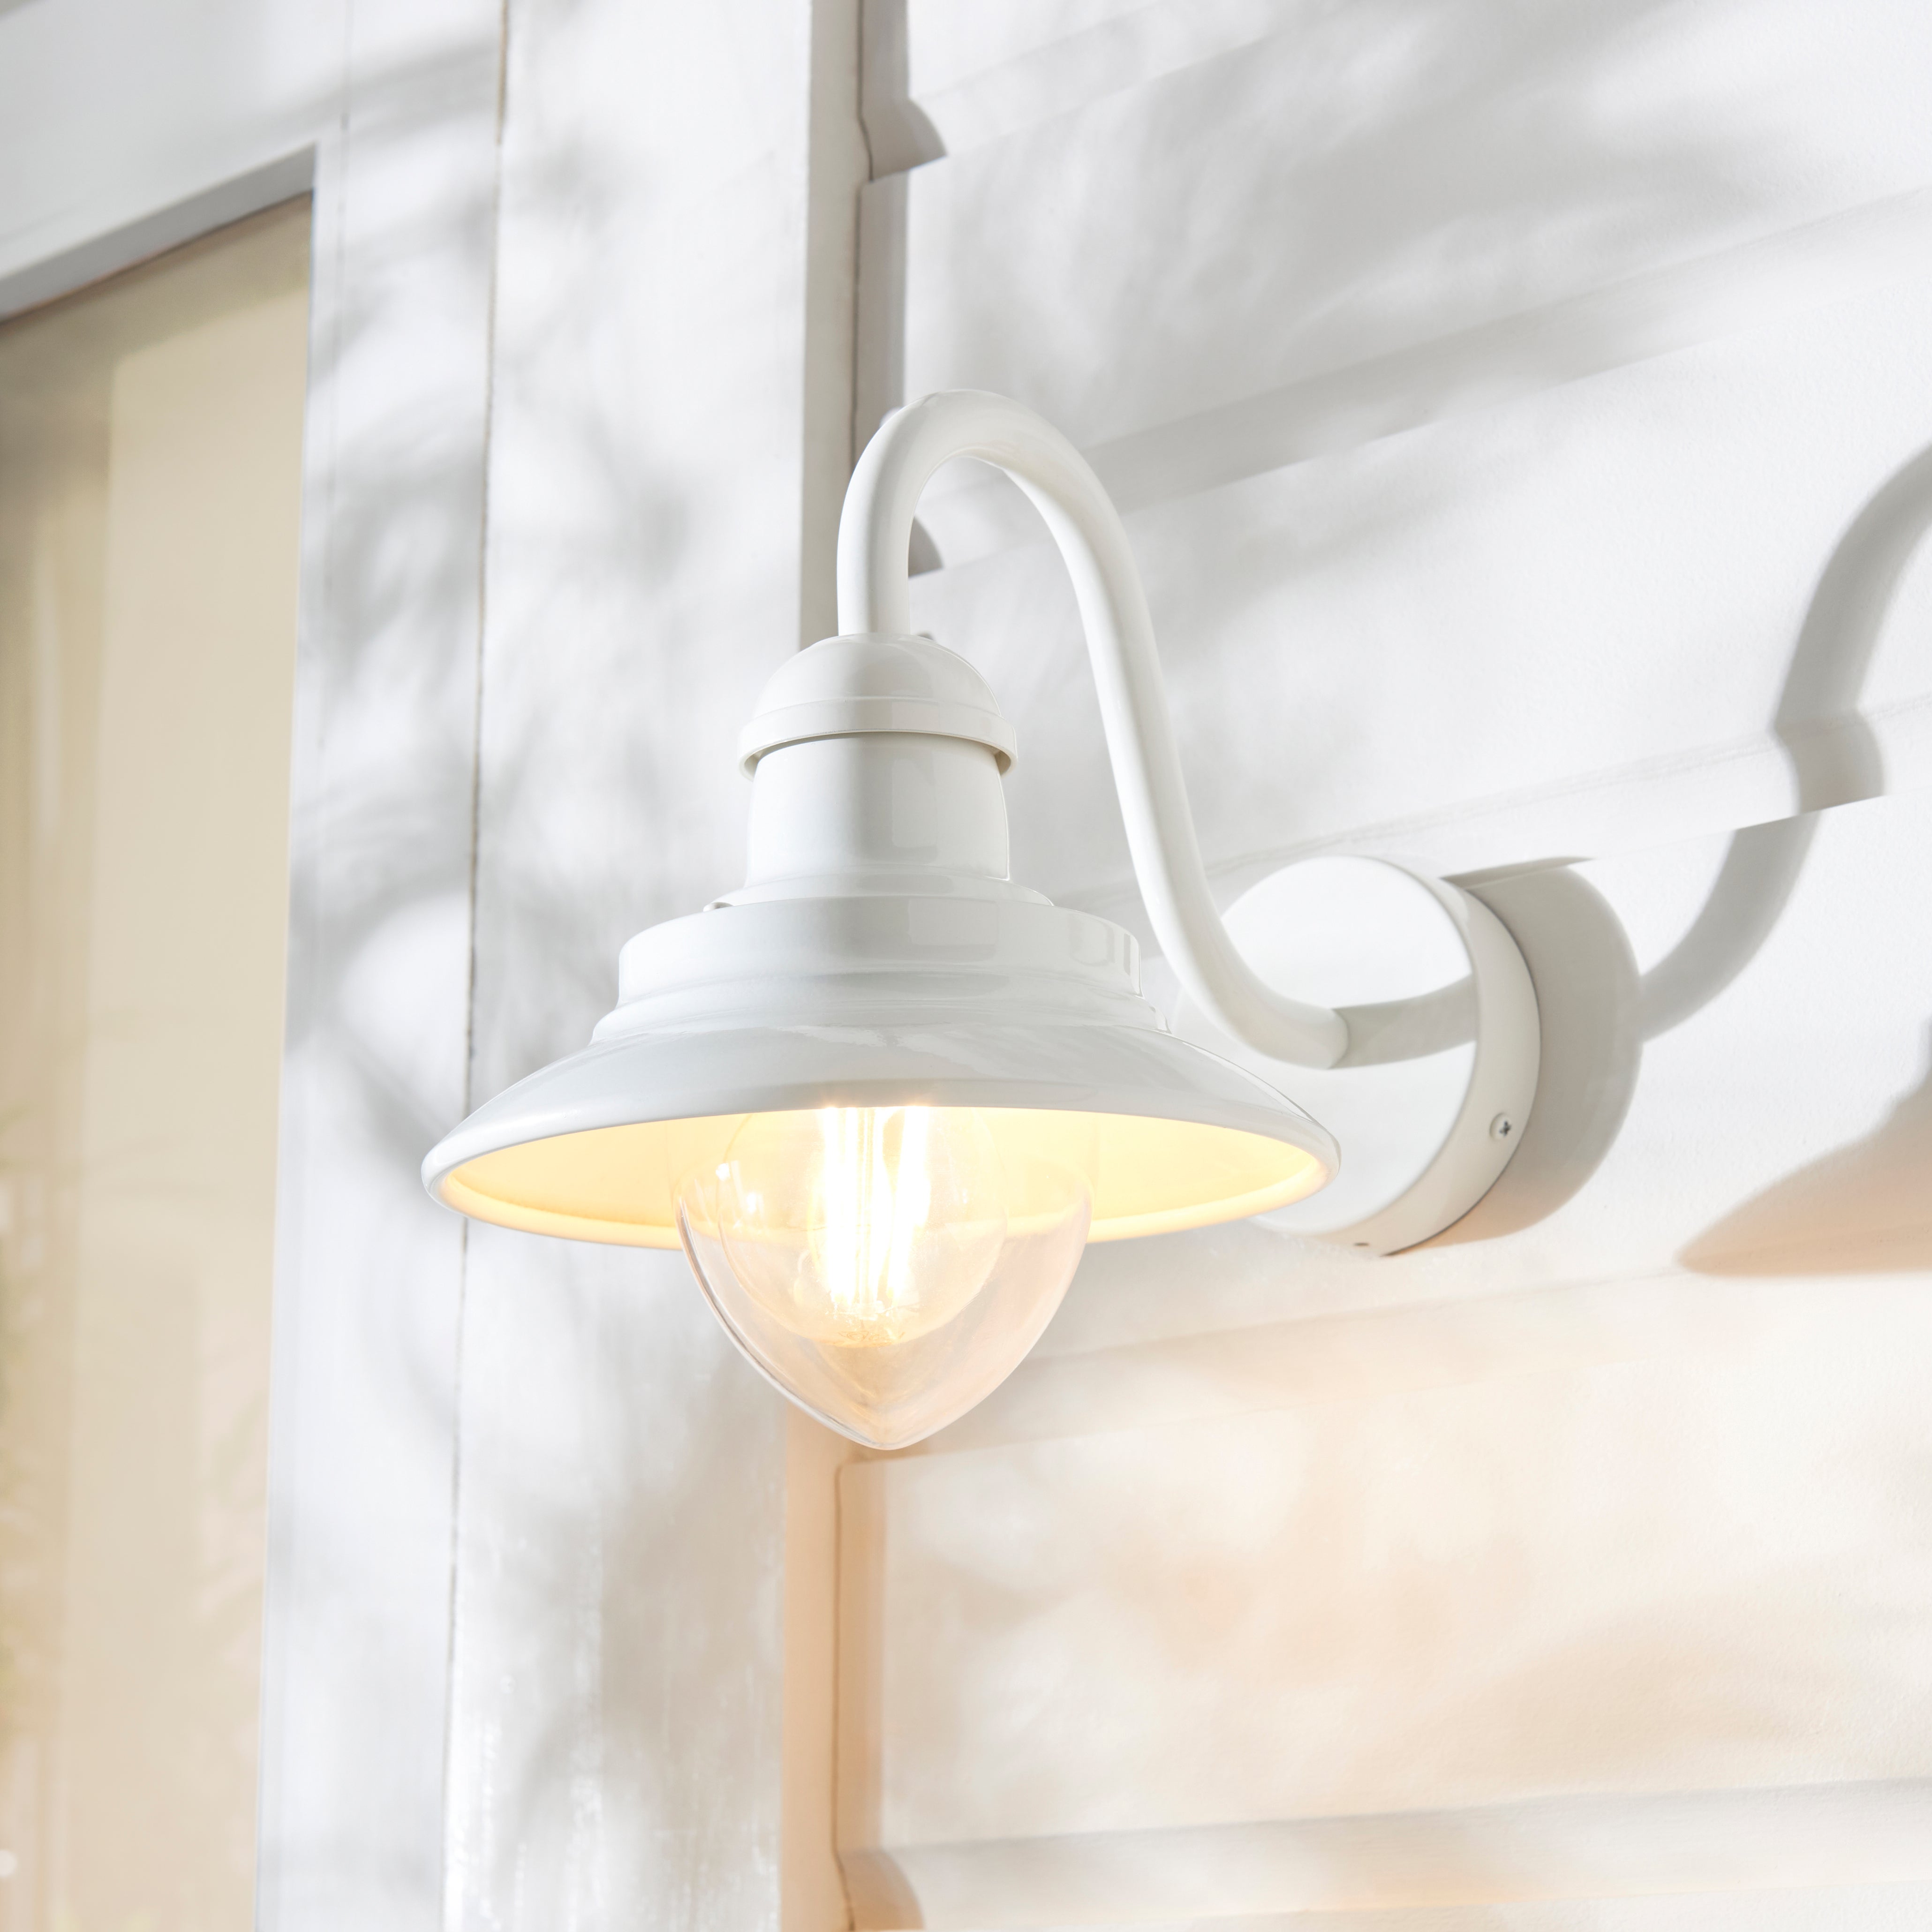 Fishermans Outdoor Adjustable Wall Light Off White